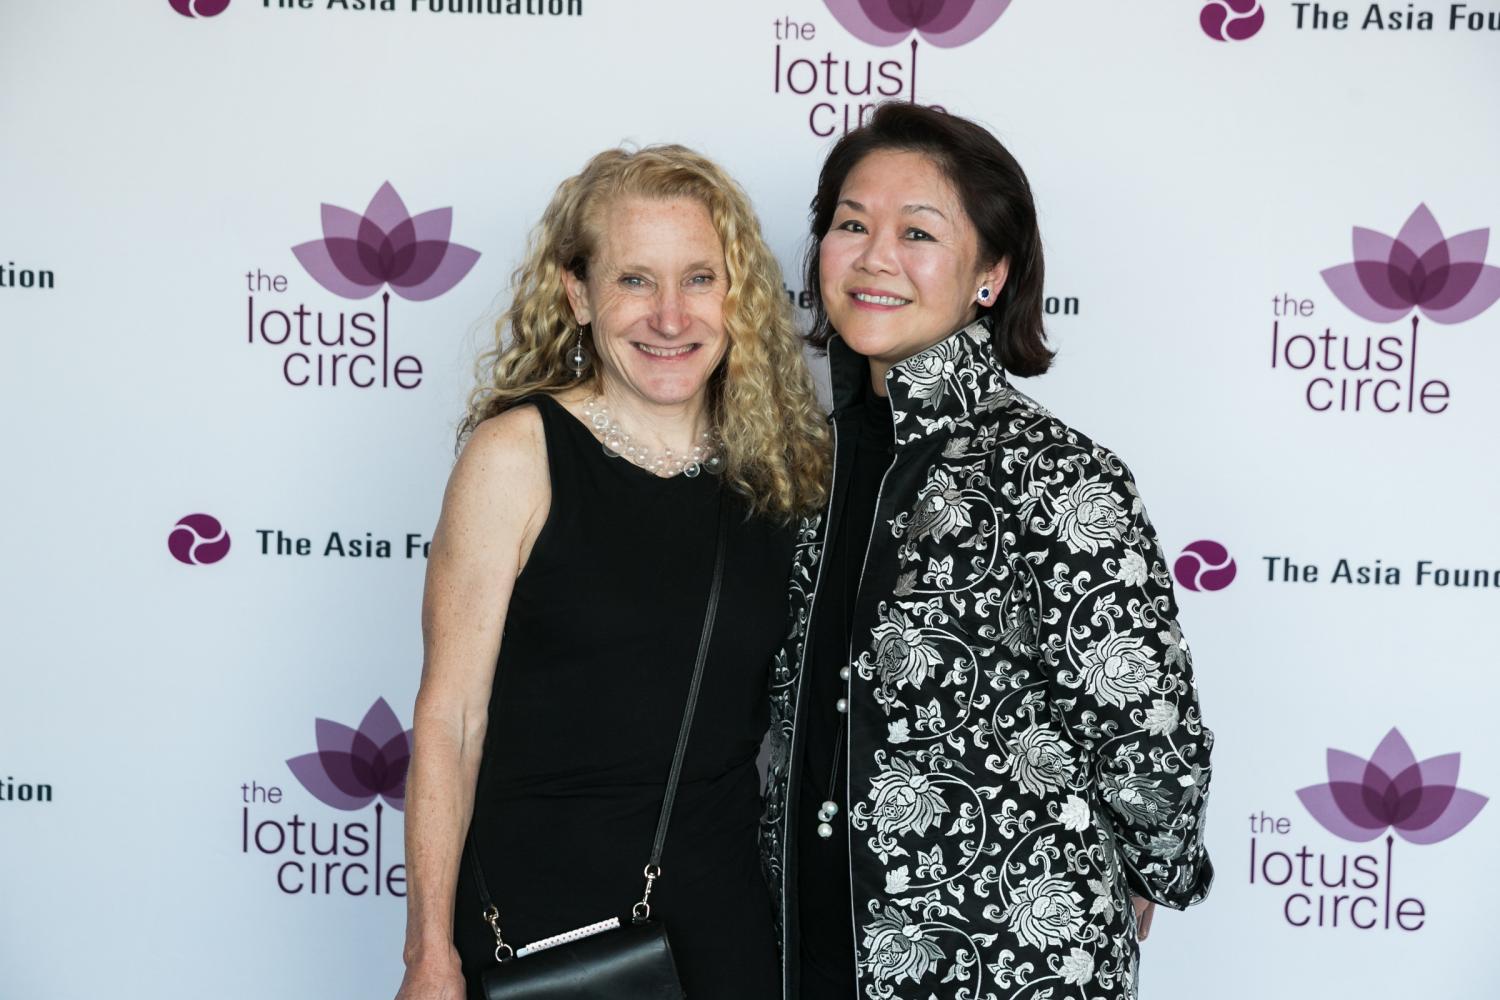 Linda Greub and Winnie Feng smile for a photo